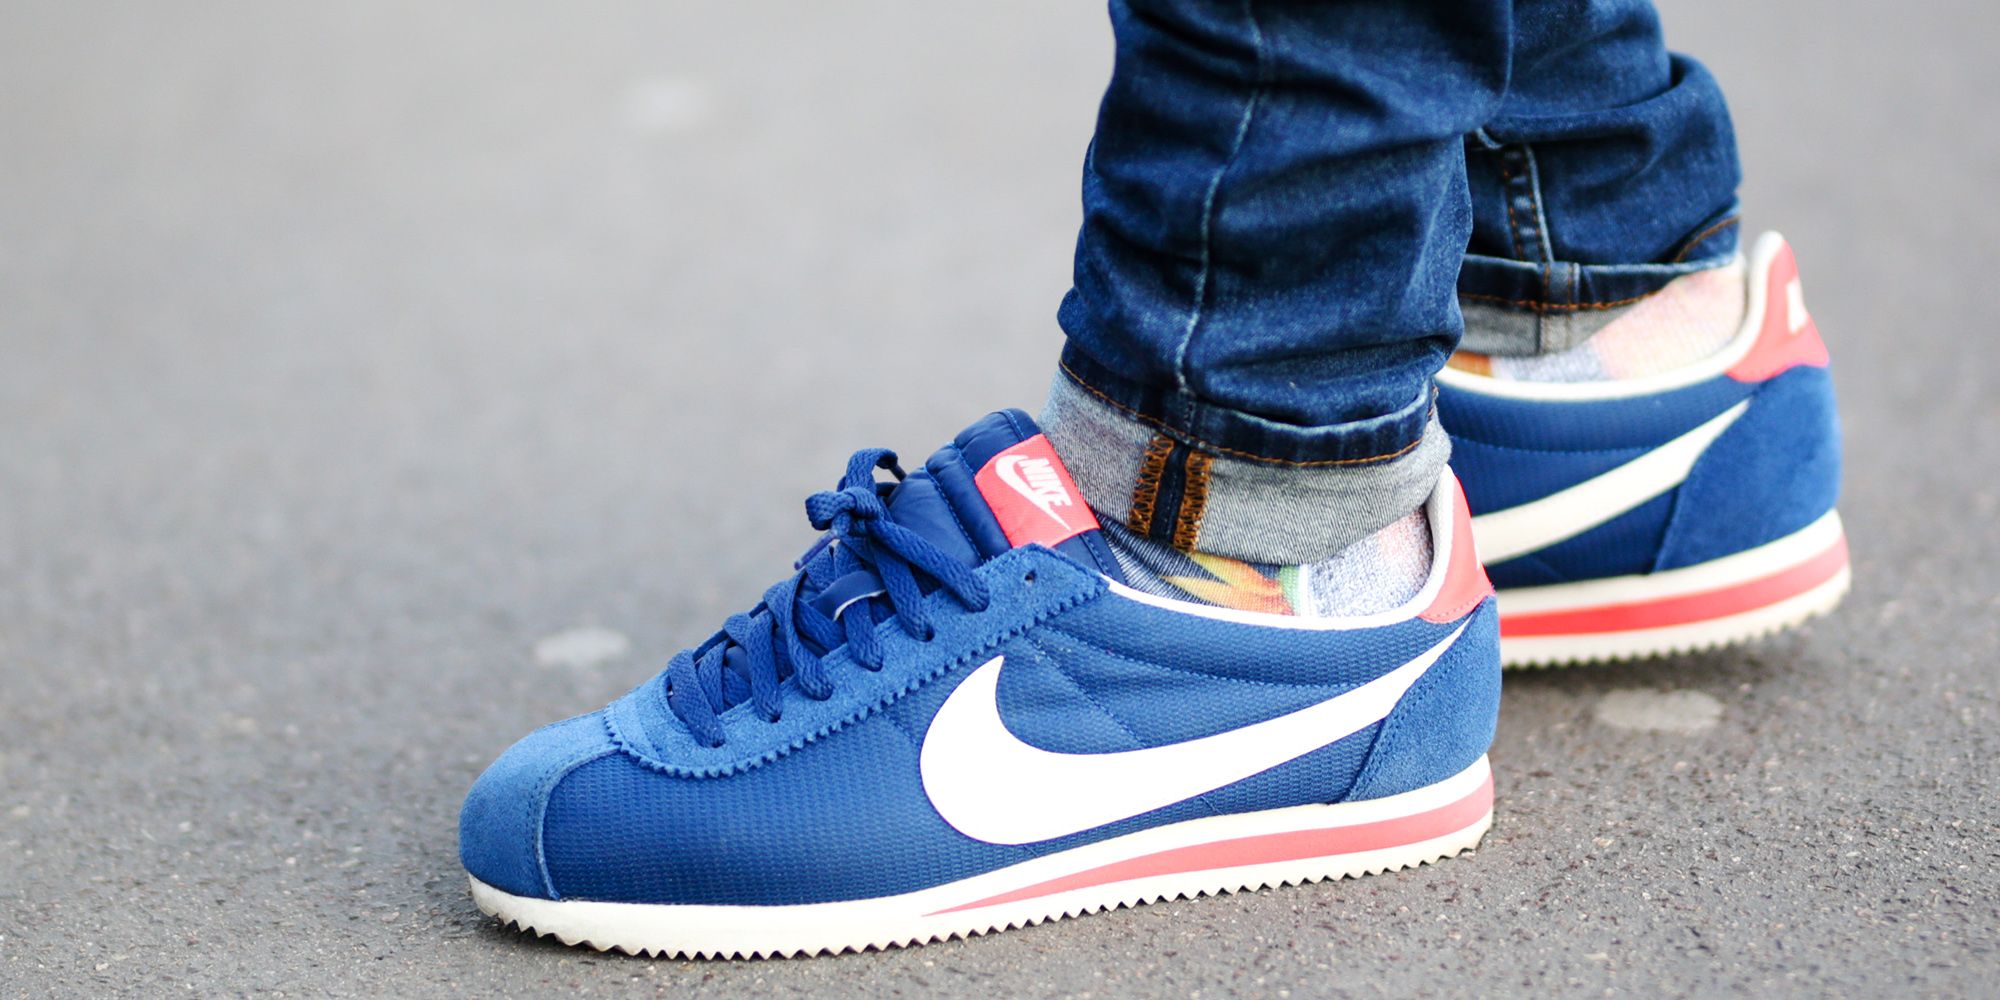 Coolest Sneakers Get Cool Retro-Inspired Sneakers for Men